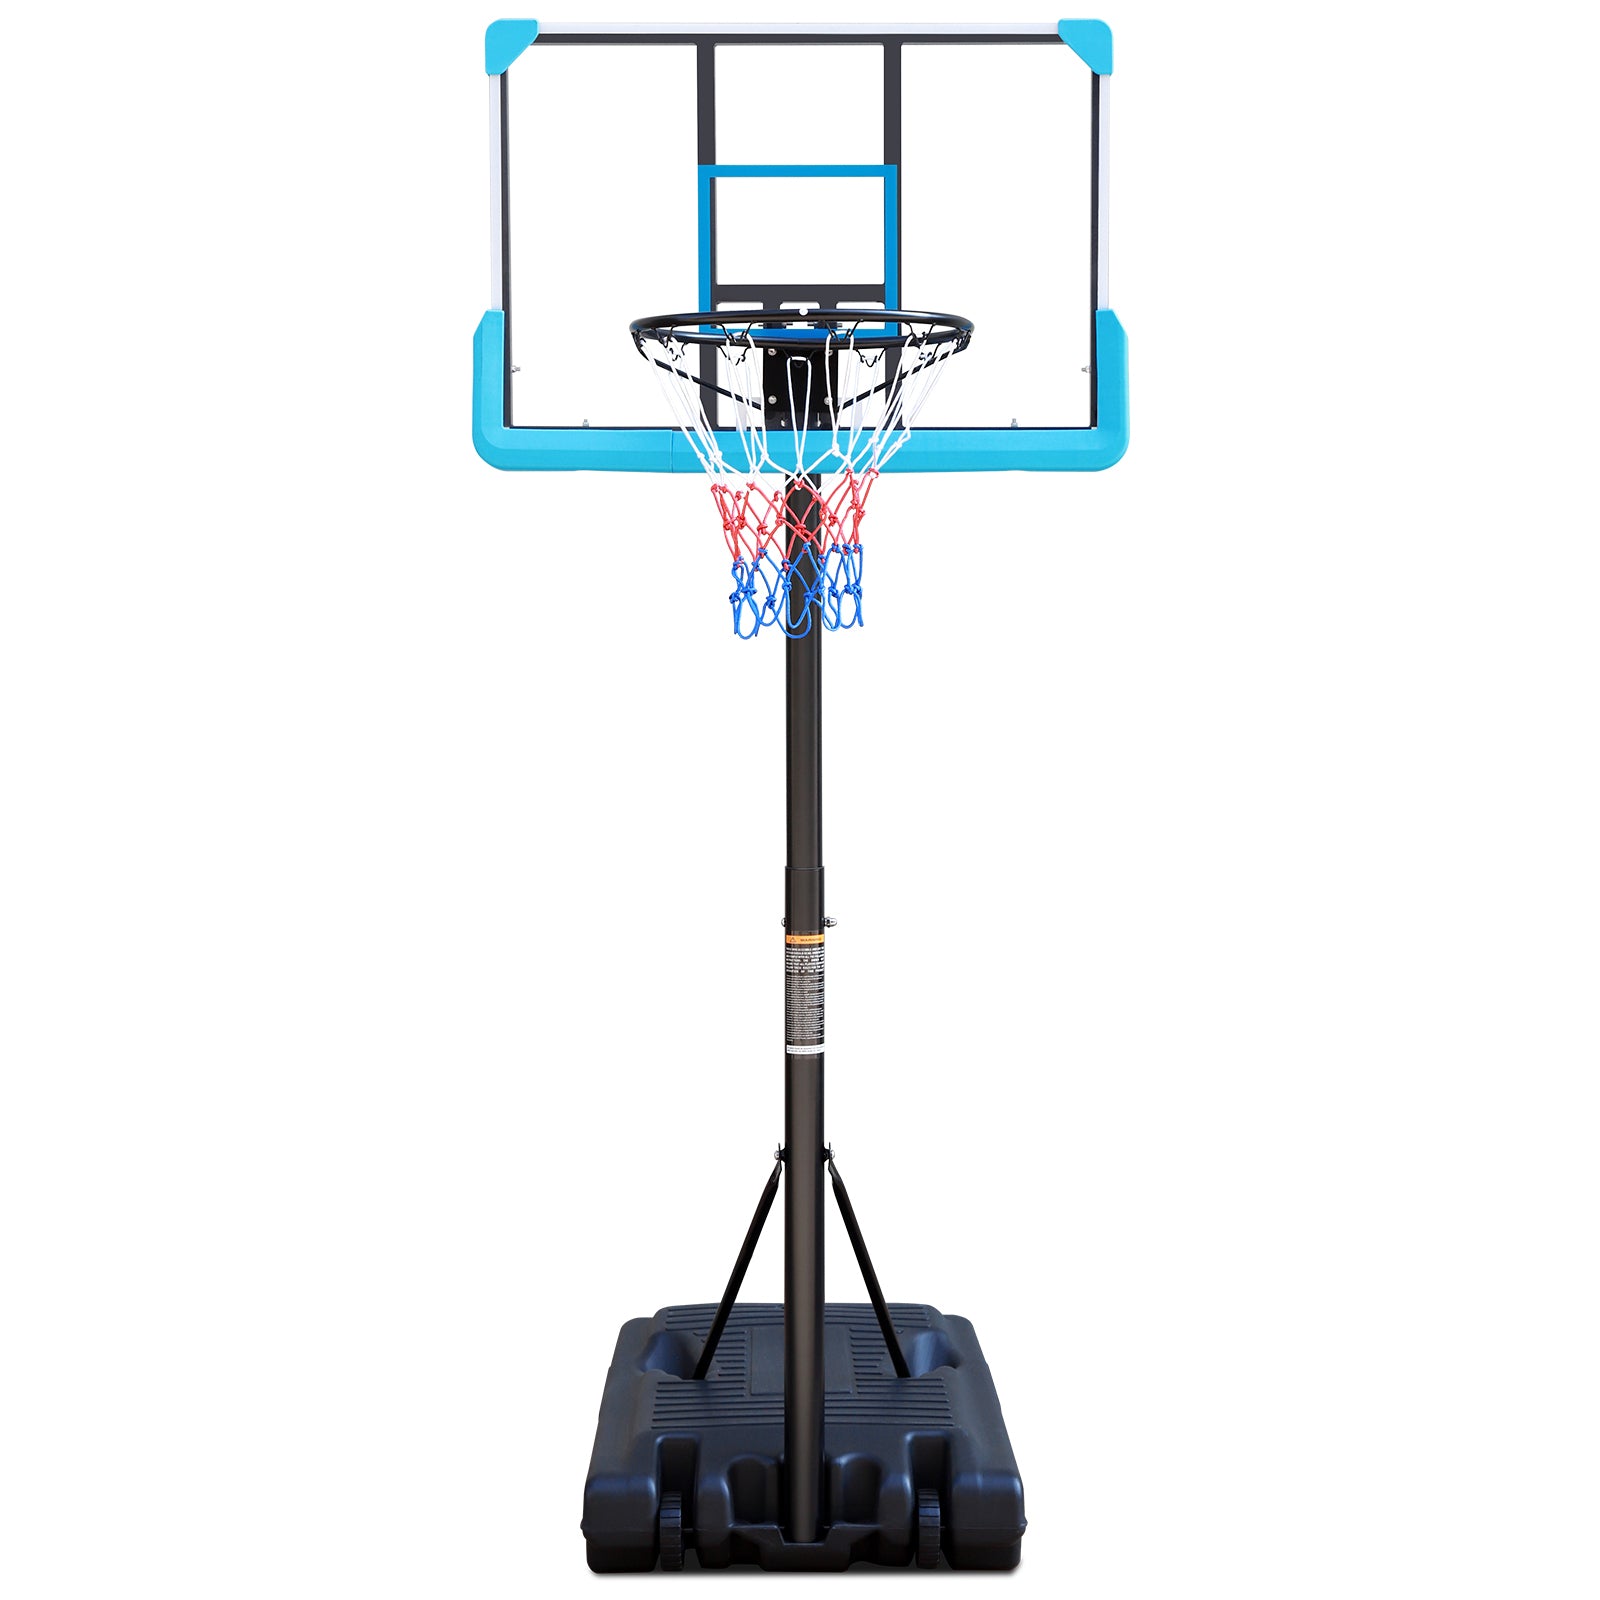 Portable Poolside Black Basketball Hoop Swimming Pool 4ft to 6.5ft Height-Adjustable patio Basketball System Goal Stand for Kids